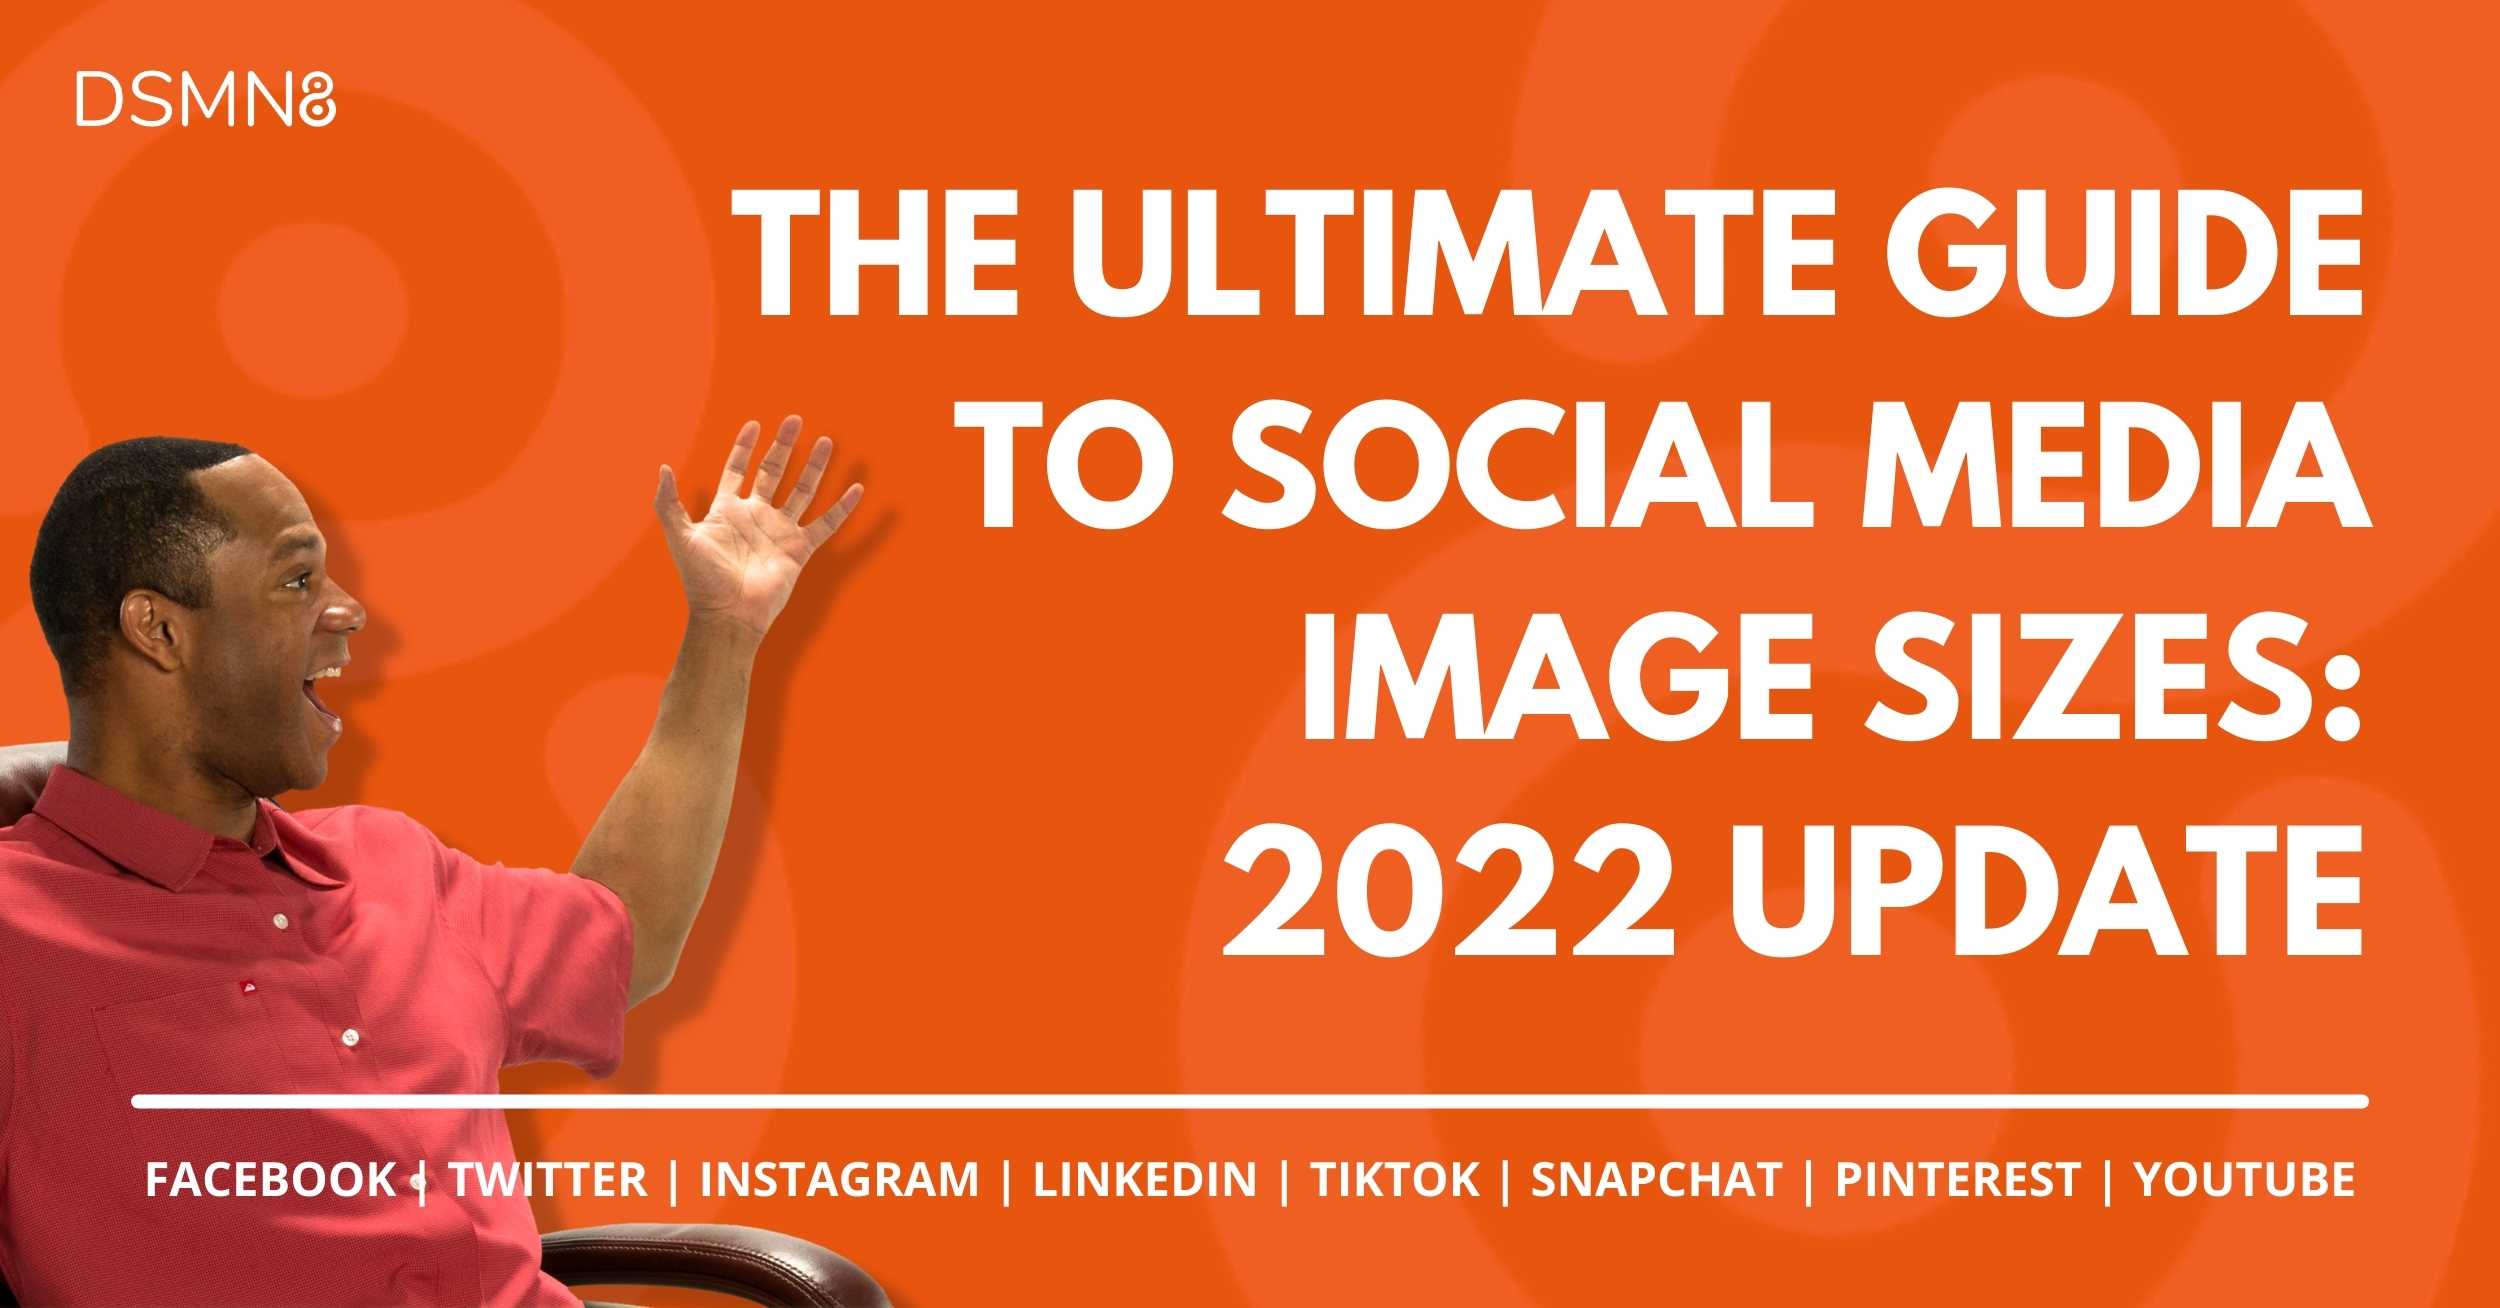 THE ULTIMATE GUIDE TO SOCIAL MEDIA IMAGE SIZES: 2022 UPDATE